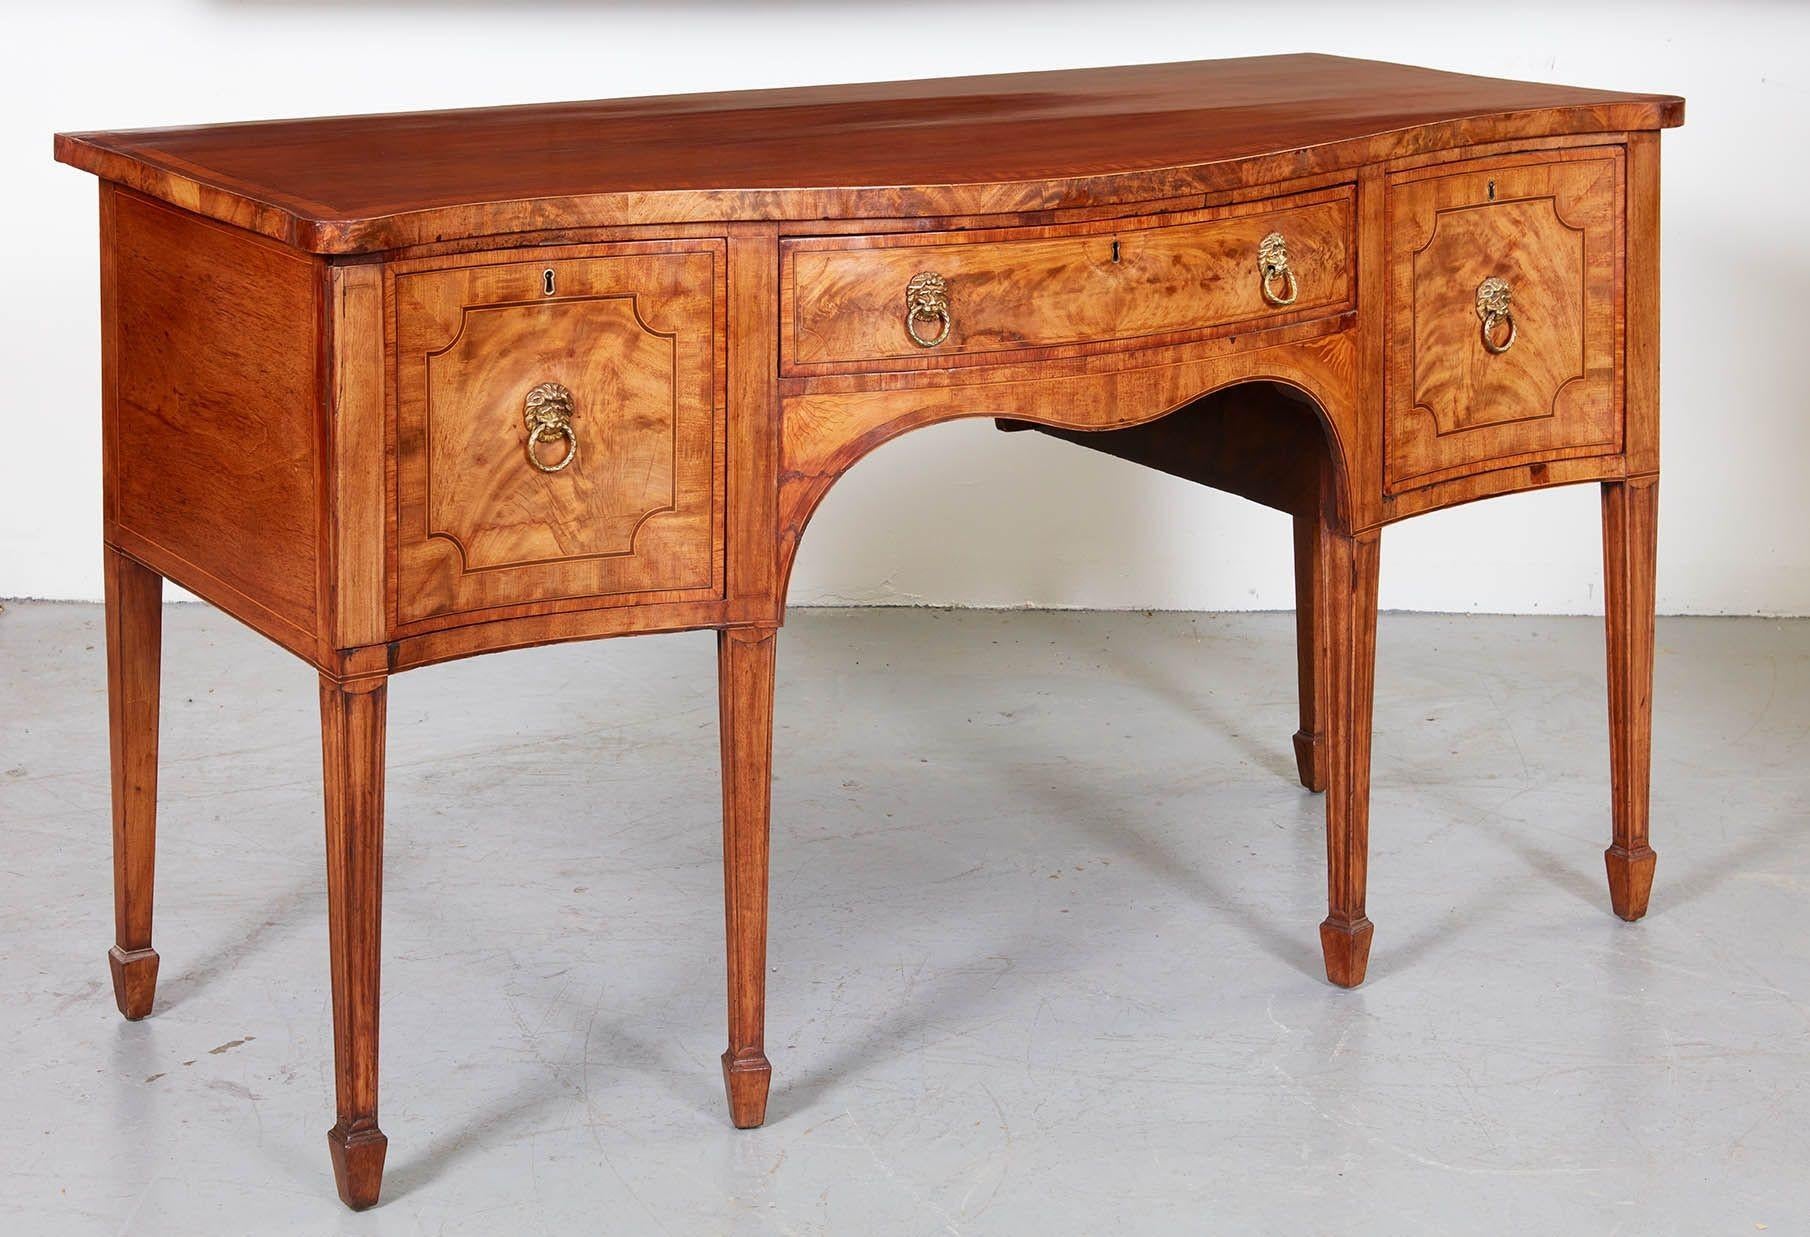 A fine period George III bowfront Hepplewhite mahogany sideboard. An imposing piece, featuring marquetry inlaid sunray corners, featherbanded drawer fronts with curved satinwood string inlay, finely cast brass lion-head ring pulls and vividly